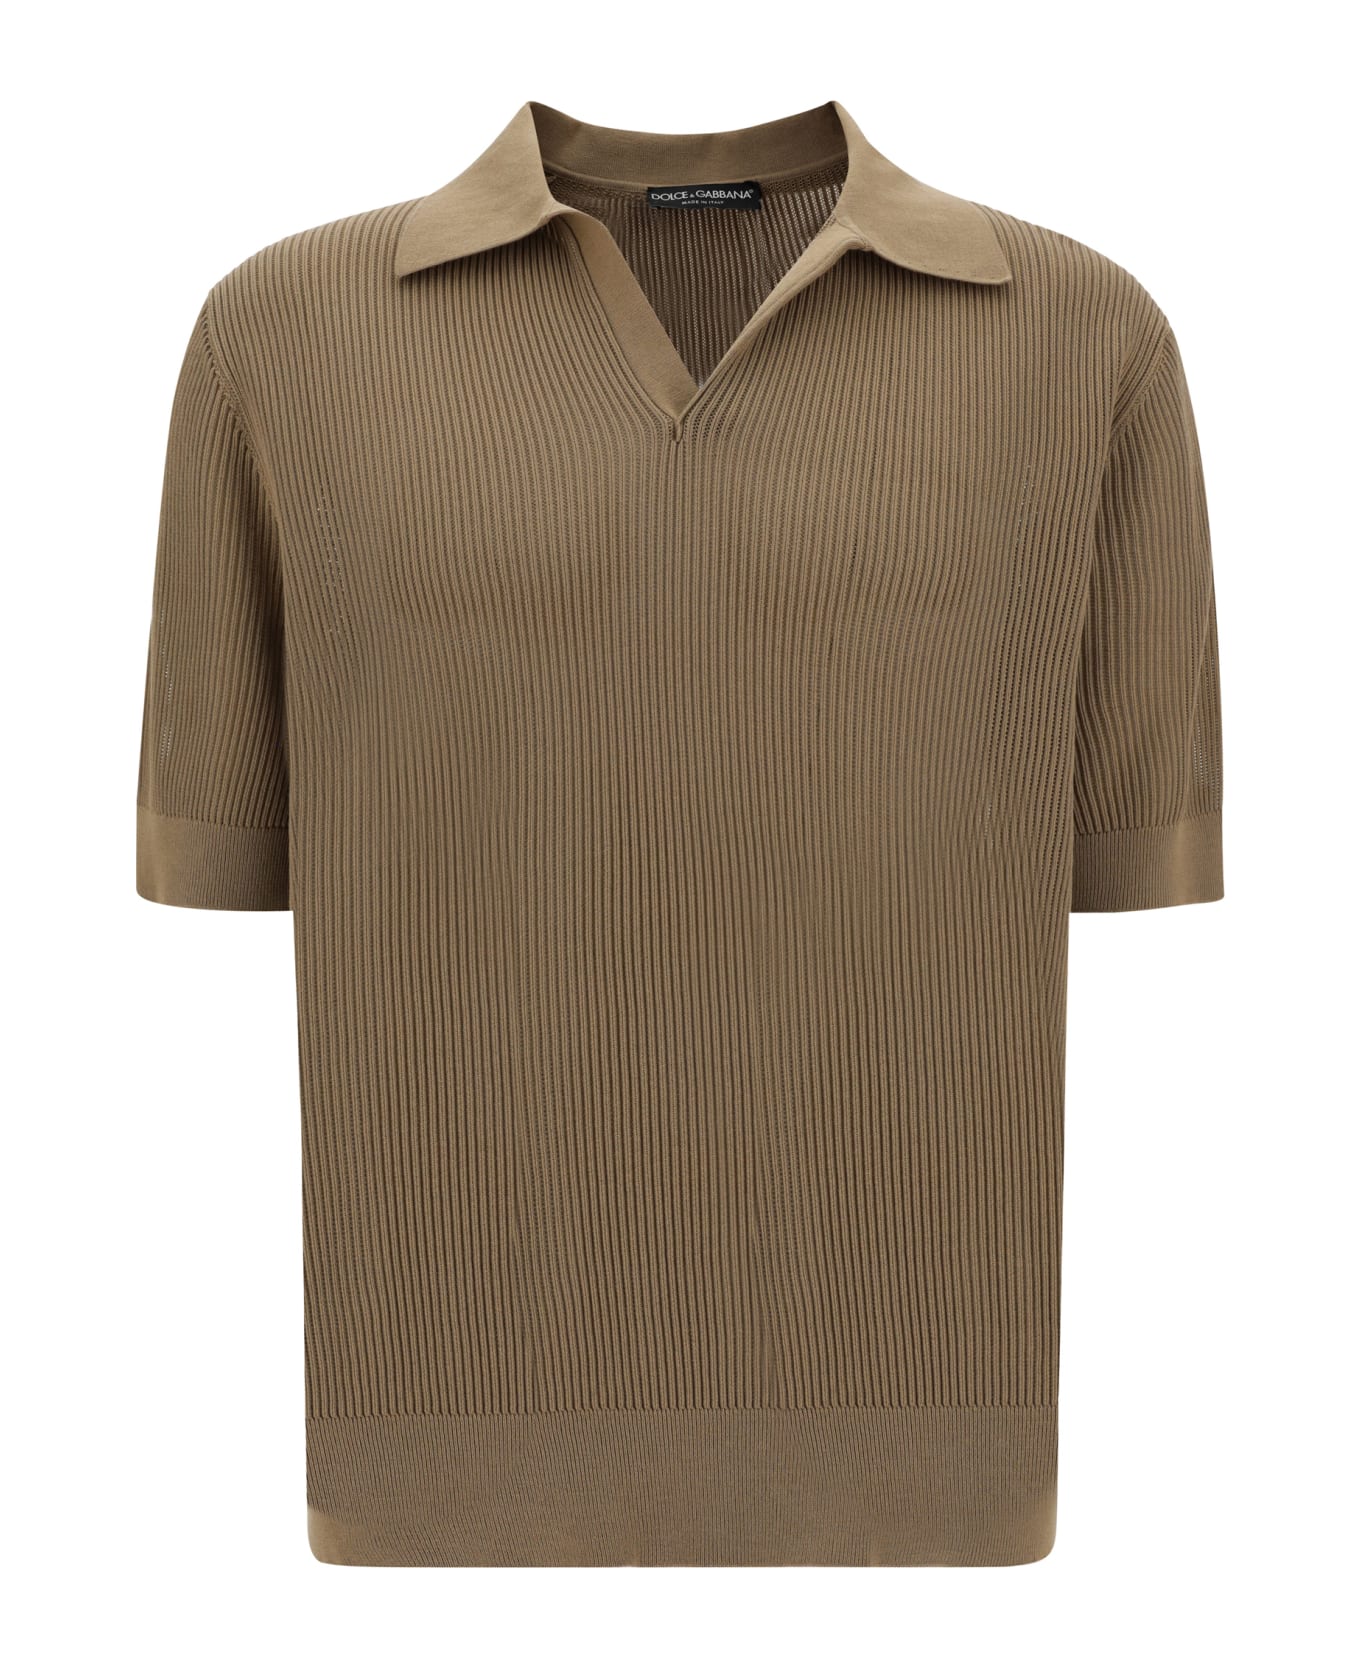 Dolce & Gabbana Perforated Cotton Polo Shirt - Beige